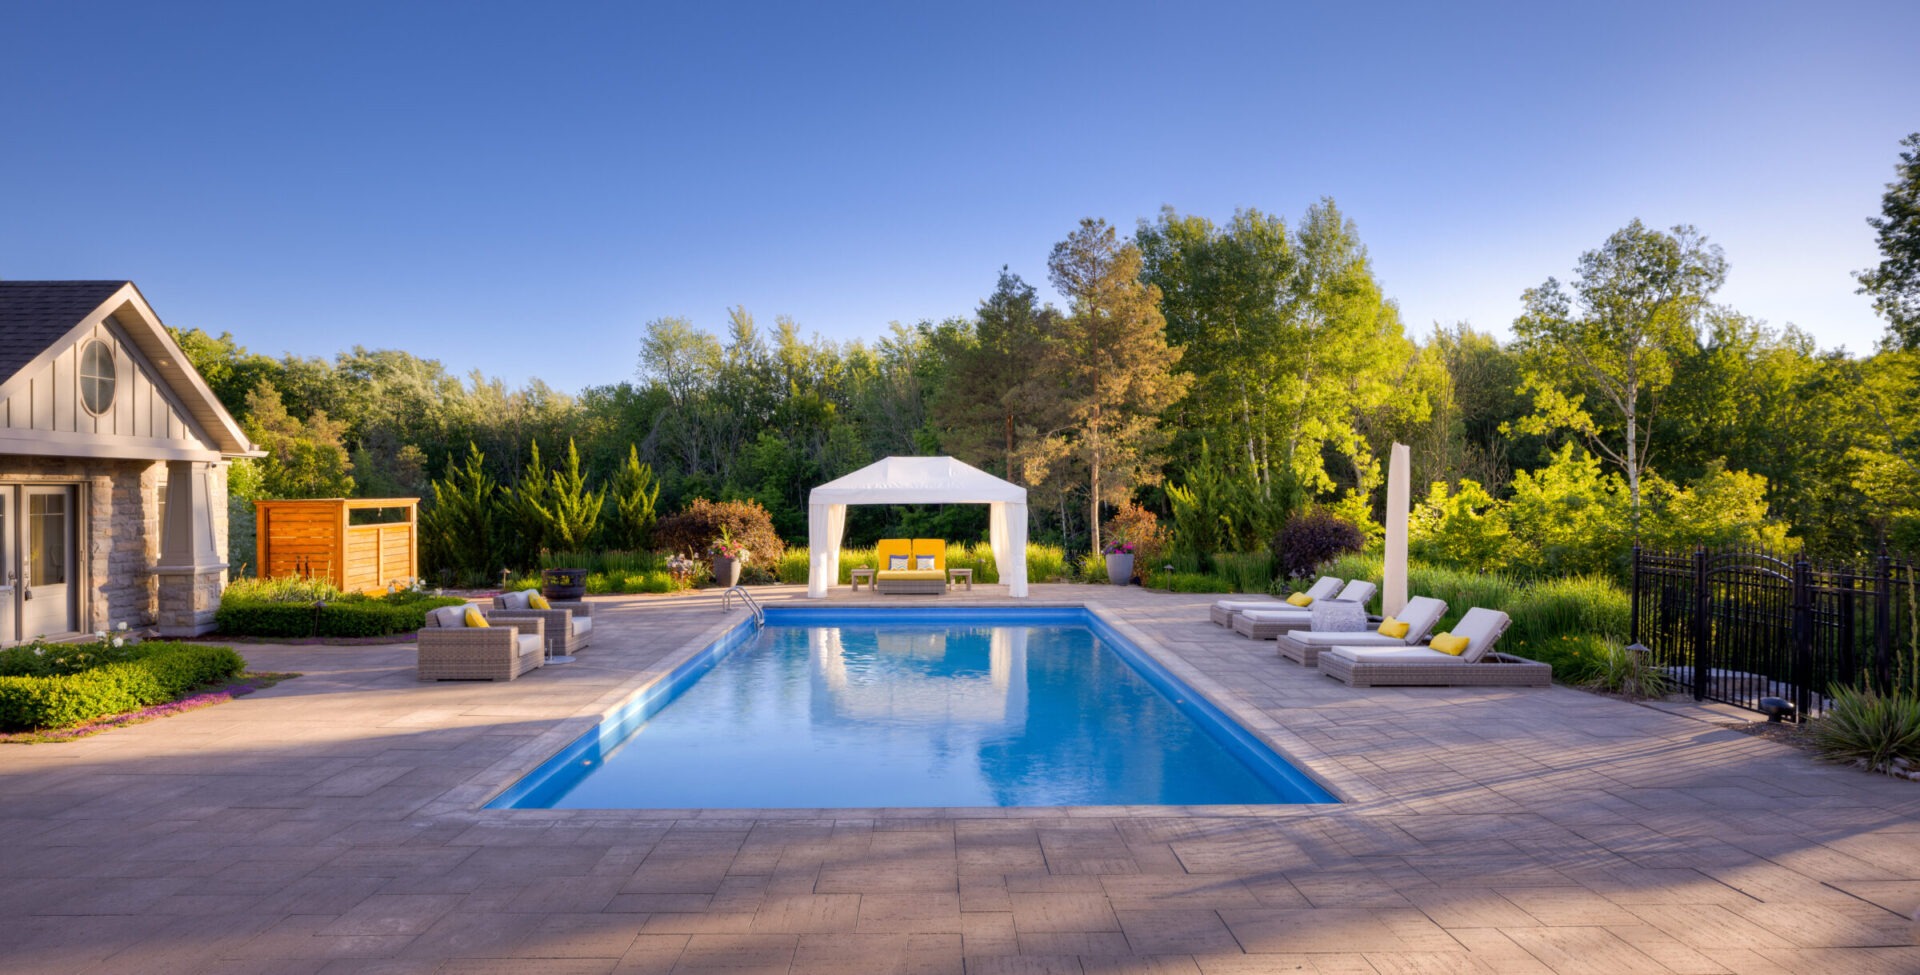 This image shows an elegant backyard with a large swimming pool, a canopy-covered seating area, lounge chairs, and lush greenery under a clear blue sky.